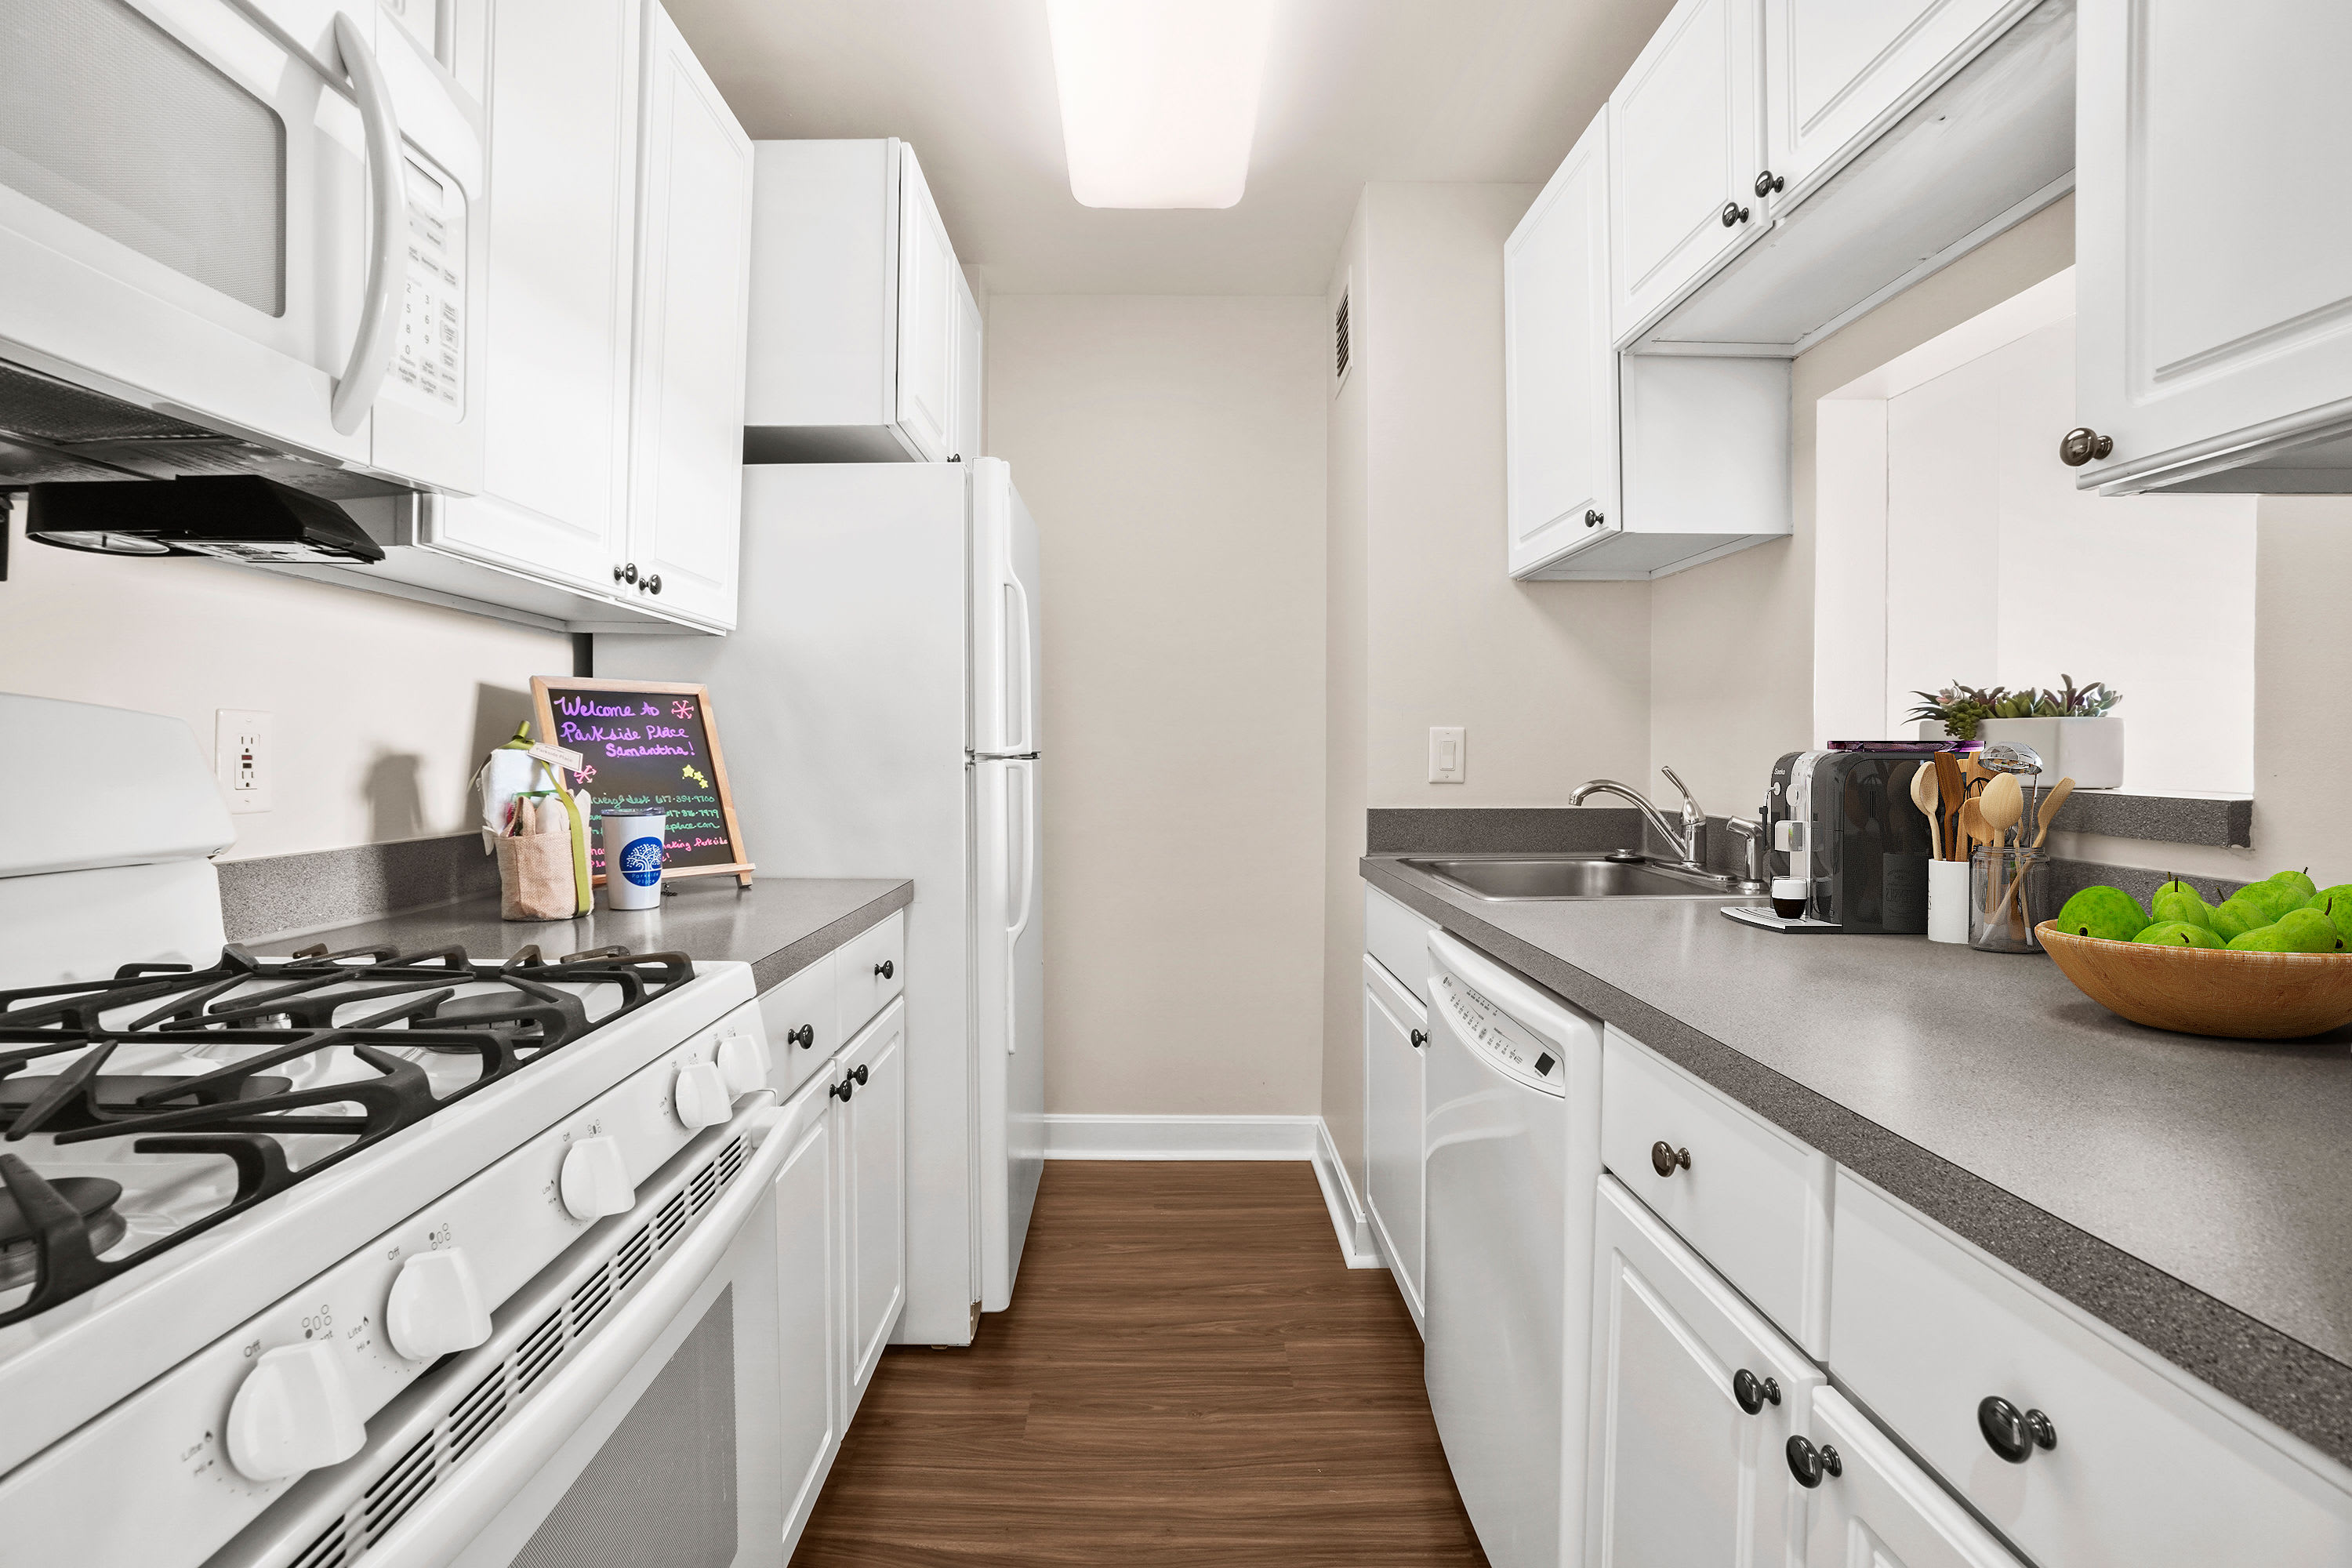 Parkside Place offers a Kitchen in Cambridge, Massachusetts